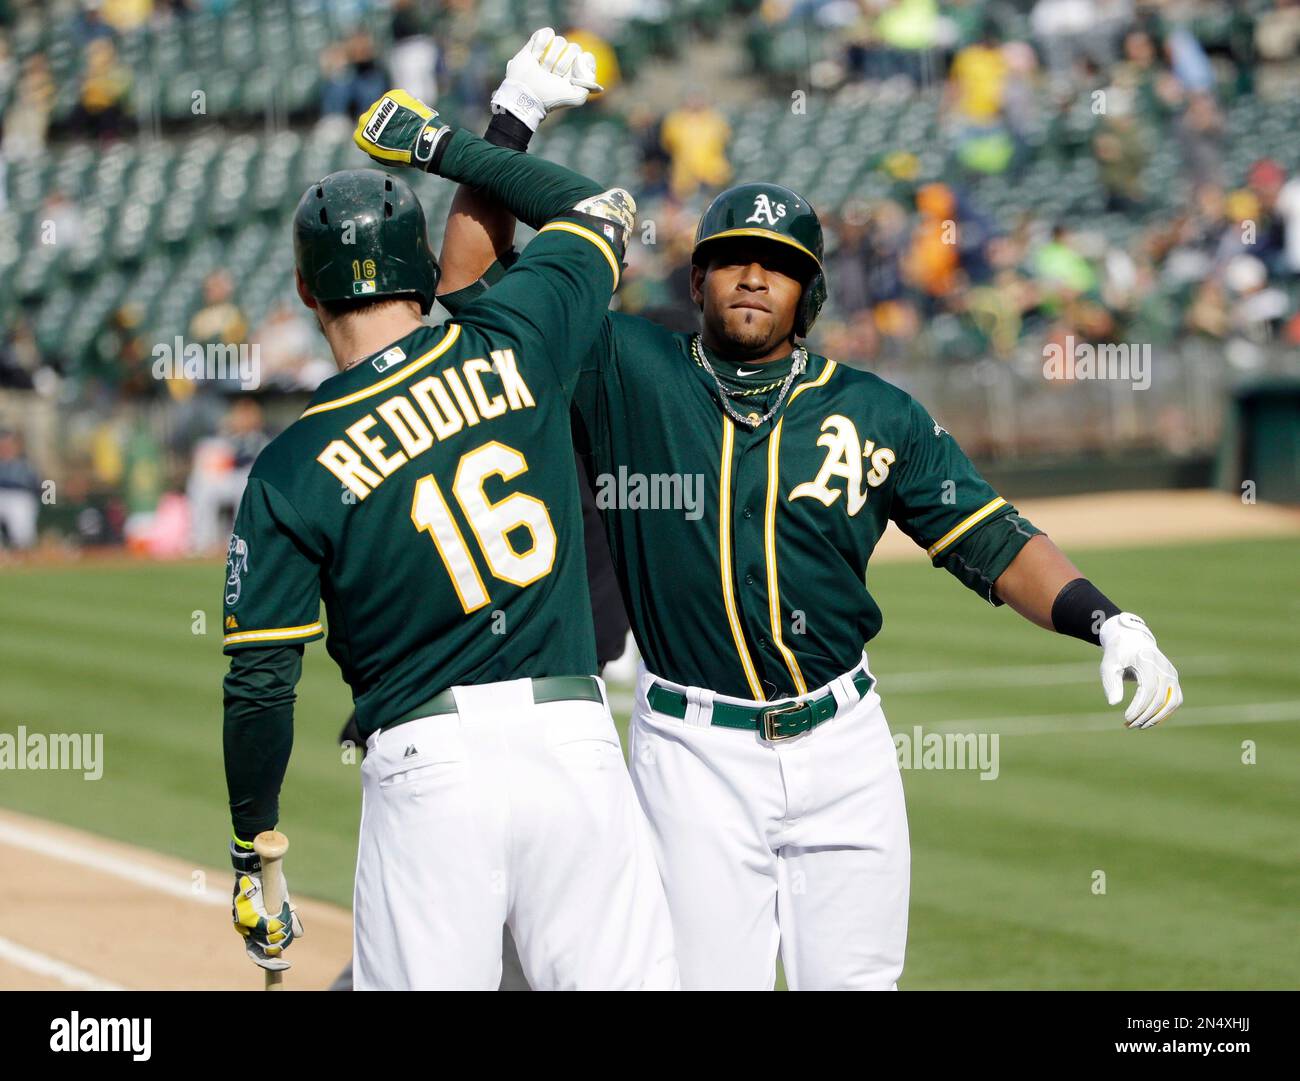 Oakland Athletics' Yoenis Cespedes, right, celebrates his solo home run  with teammate Josh Reddick (16) during the fourth inning of the second game  of a doubleheader baseball game against the Seattle Mariners